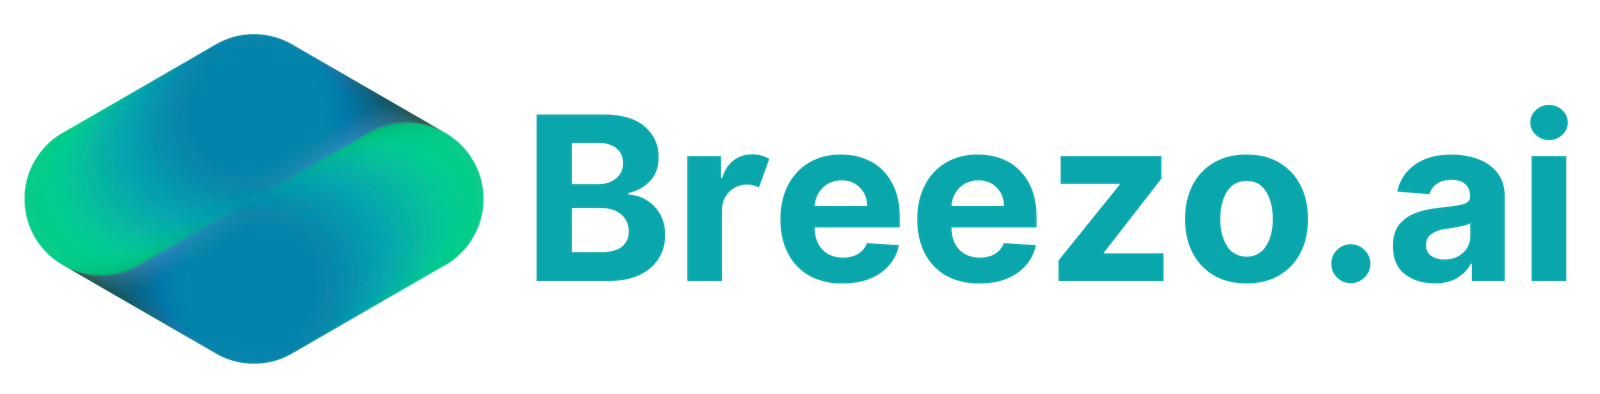 Breezo.ai – Need photos, films and performance ads for your brand. Find the best photographers, film makers, models, editors and animators for your project.